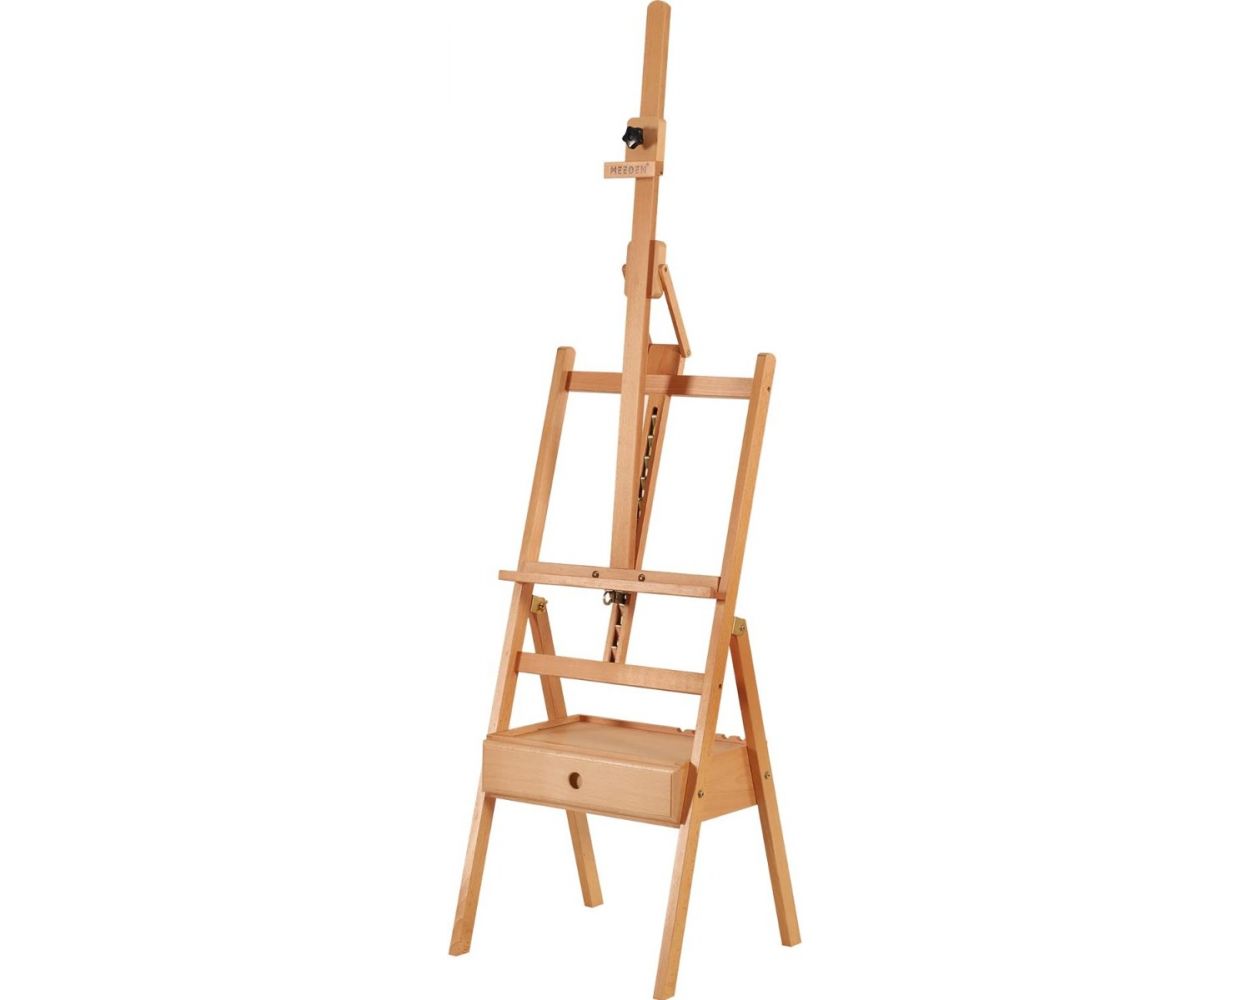 MEEDEN Large Painters Easel Adjustable Solid Beech Wood Artist Easel,  Studio Easel for Adults with Brush Holder, Holds Canvas up to 48